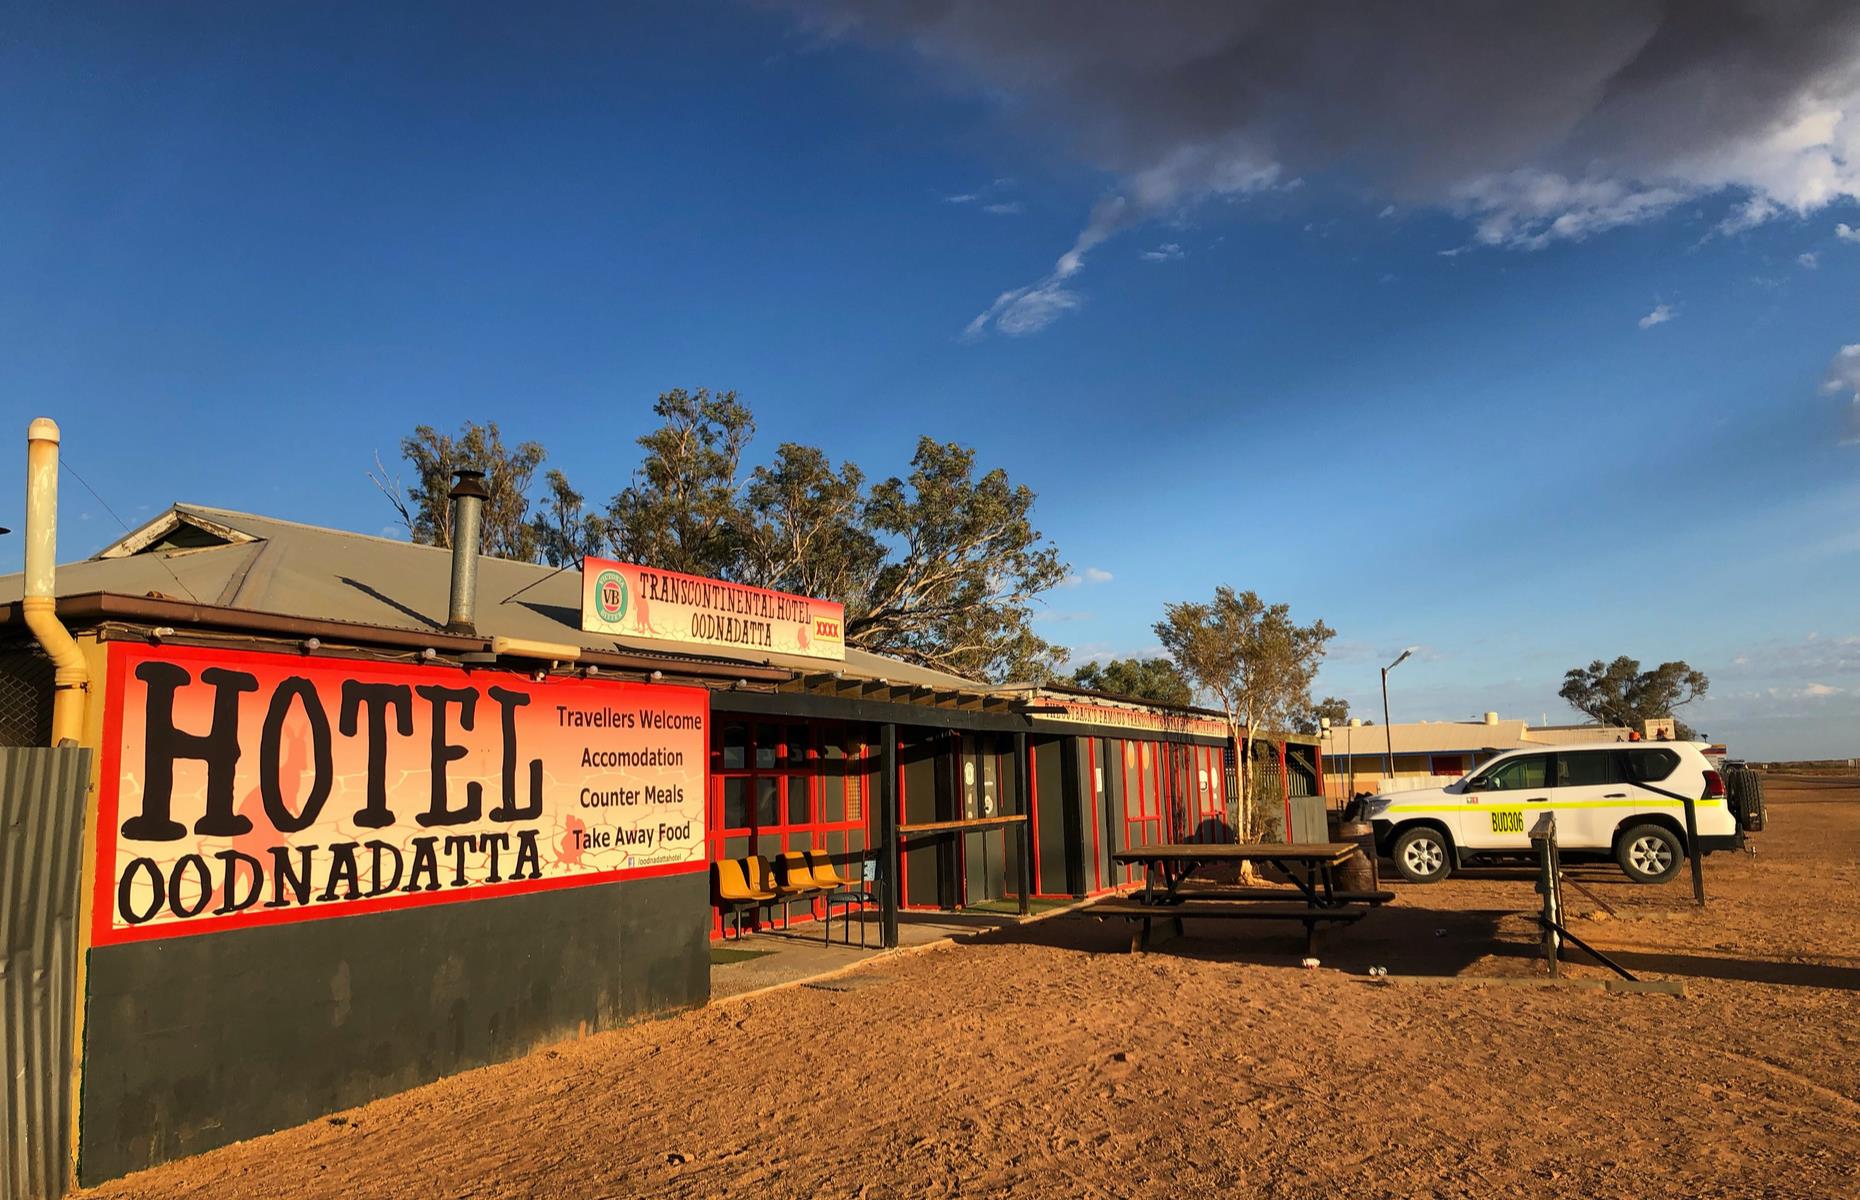 <p>The Oodnadatta Track – a traditional Aboriginal trading route – begins at Marree in South Australia and travels roughly northwest for 385 miles through the tiny town of Oodnadatta before looping back to the Stuart Highway at Marla. Once a stop on the original Ghan Railway, tiny Oodnadatta has a pub (in the Transcontinental Hotel, which is owned by the local Aboriginal people), the hard-to-miss Pink Roadhouse, post office and an intriguing little museum in one of the town’s old railway station buildings.</p>